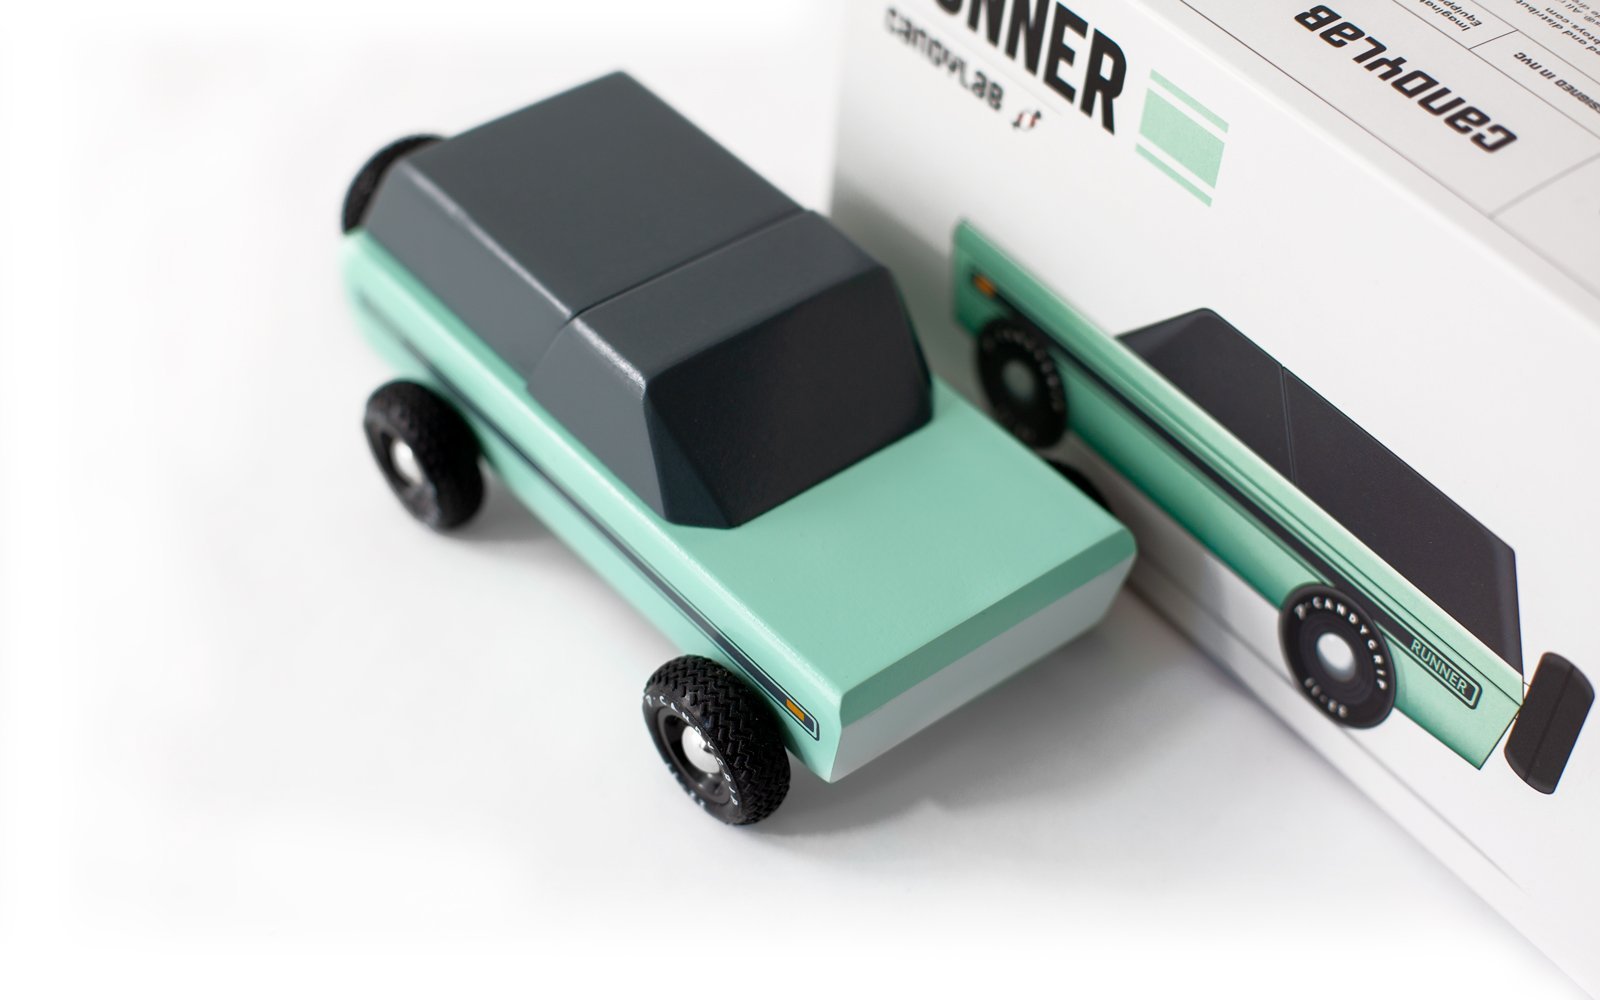 Candylab Toys Runner - Modern Vintage Toy Truck - Wood Wood Toys Canada's Favourite Montessori Toy Store